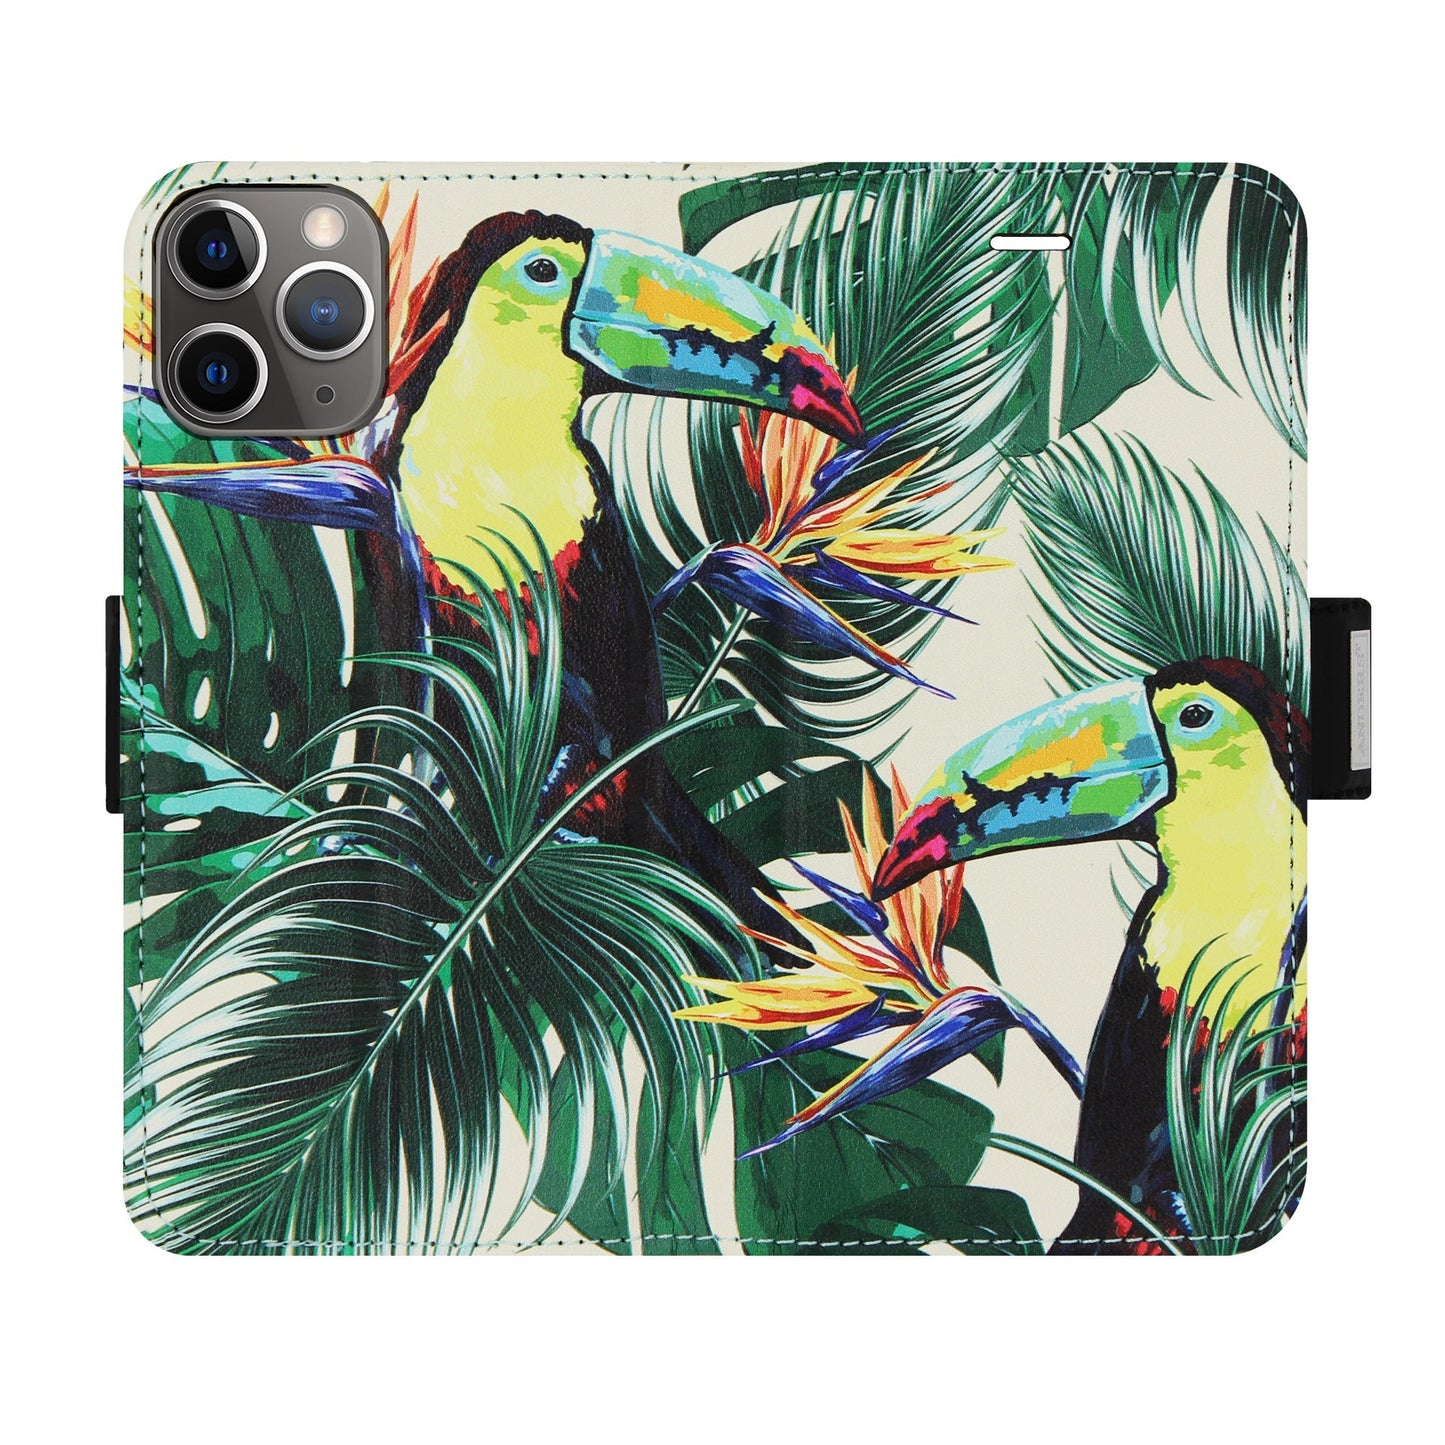 Toucan Victor Case for iPhone 12 Pro Max